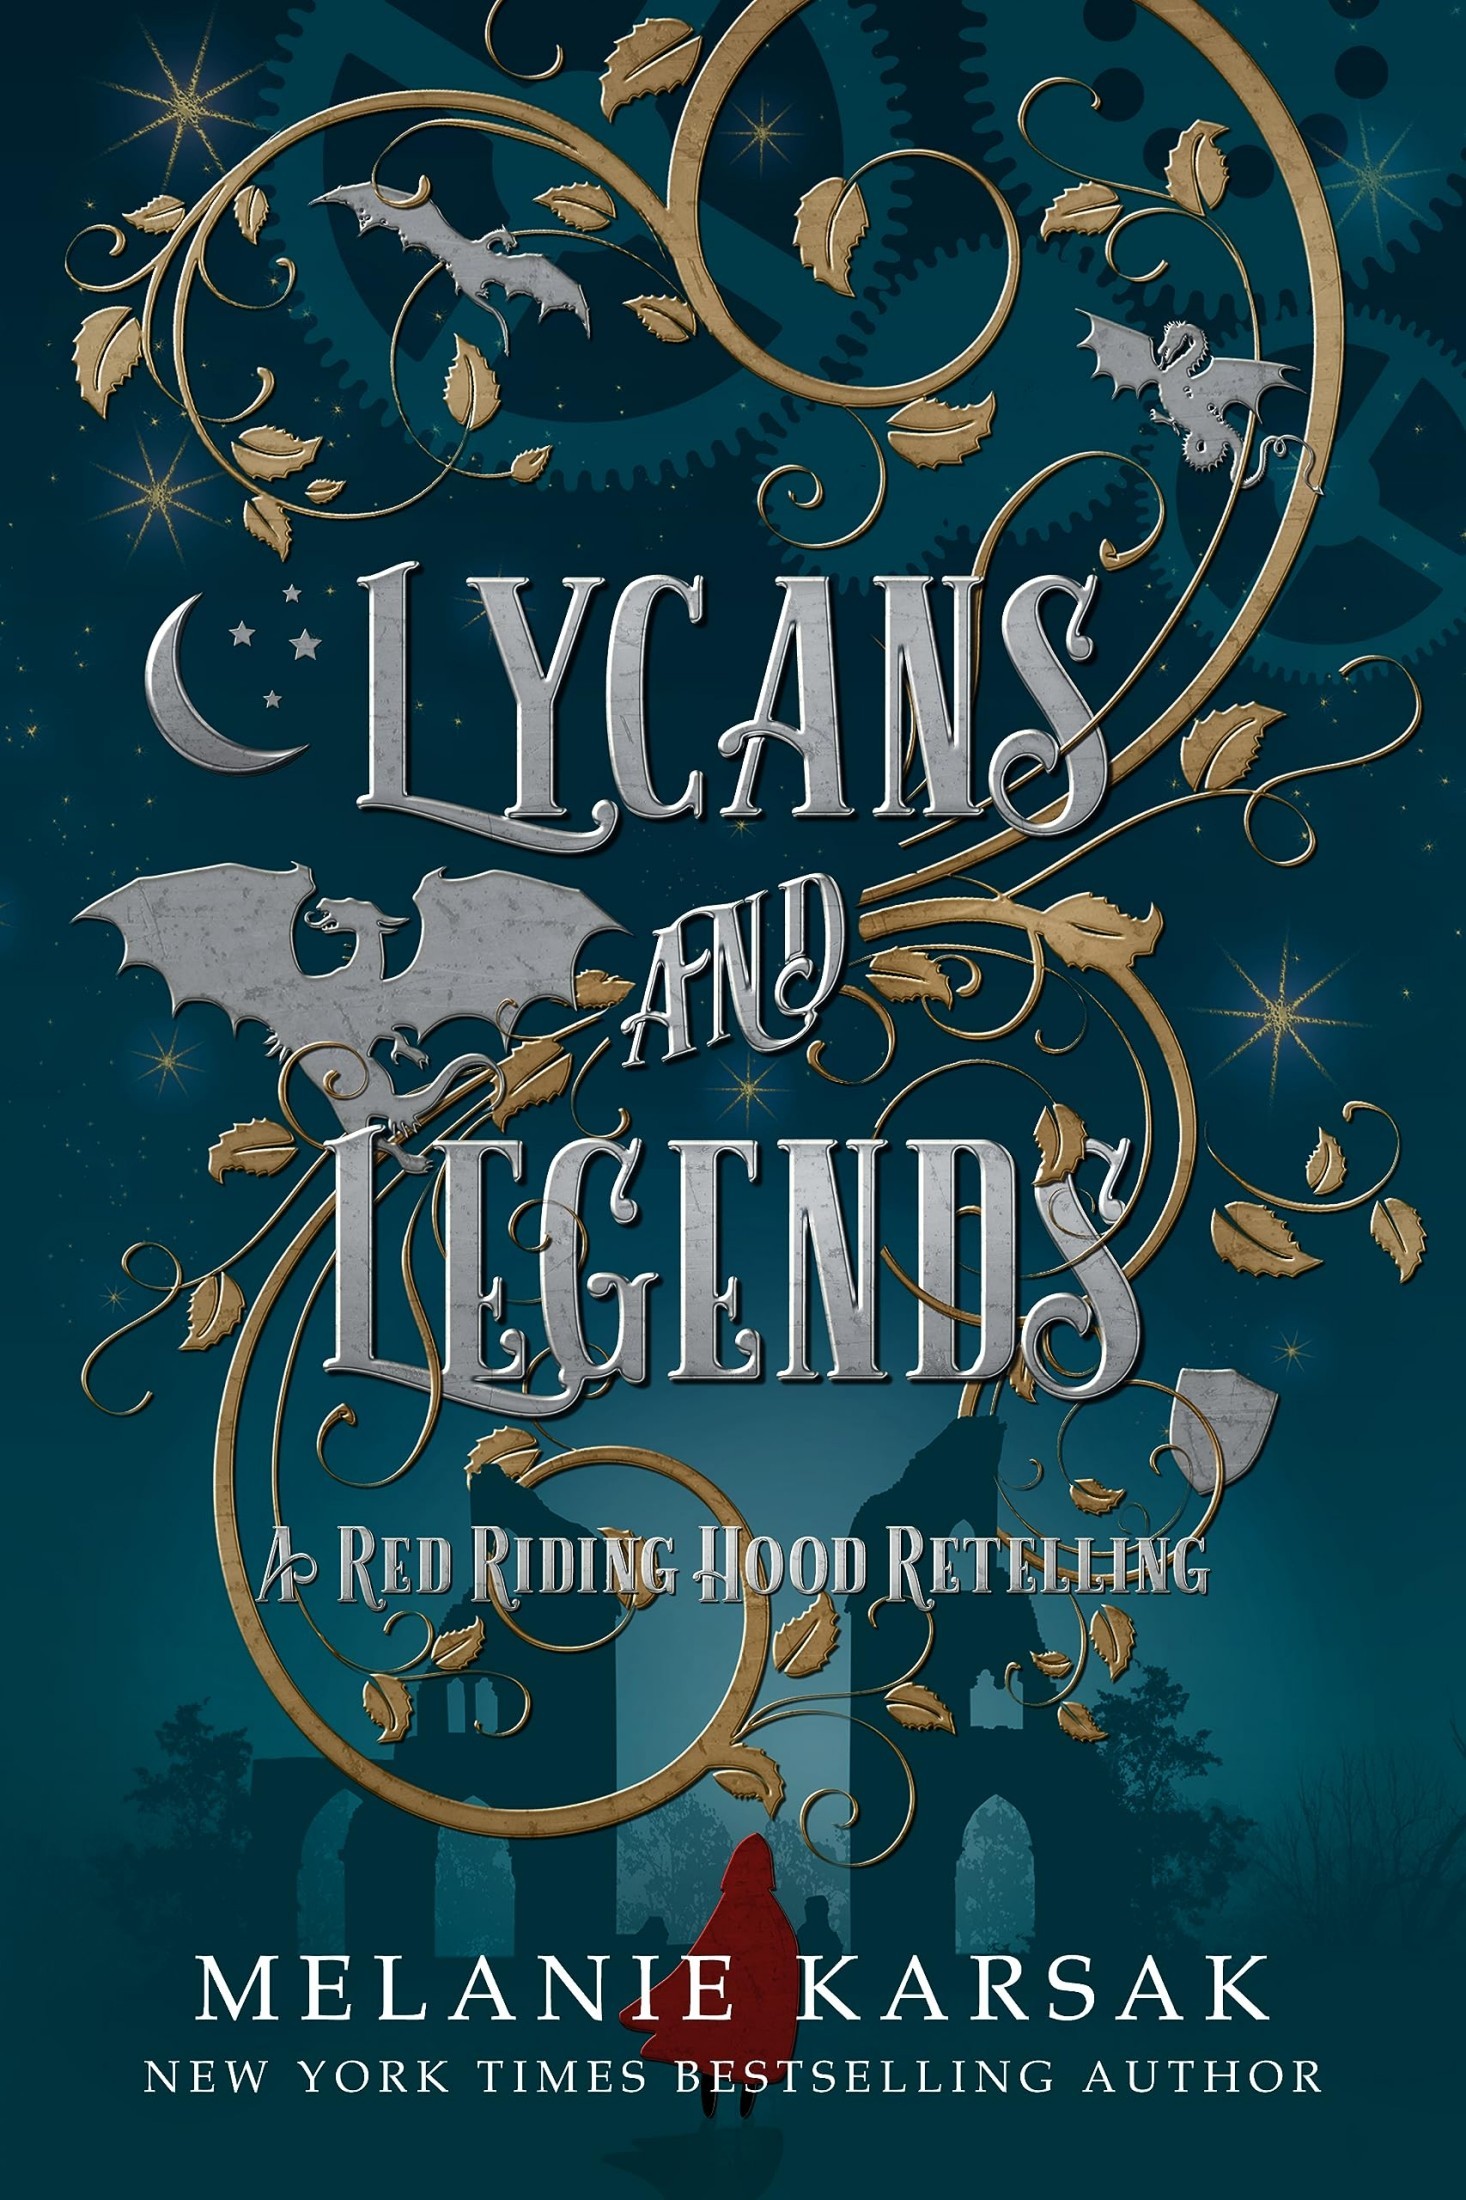 Lycans and Legends